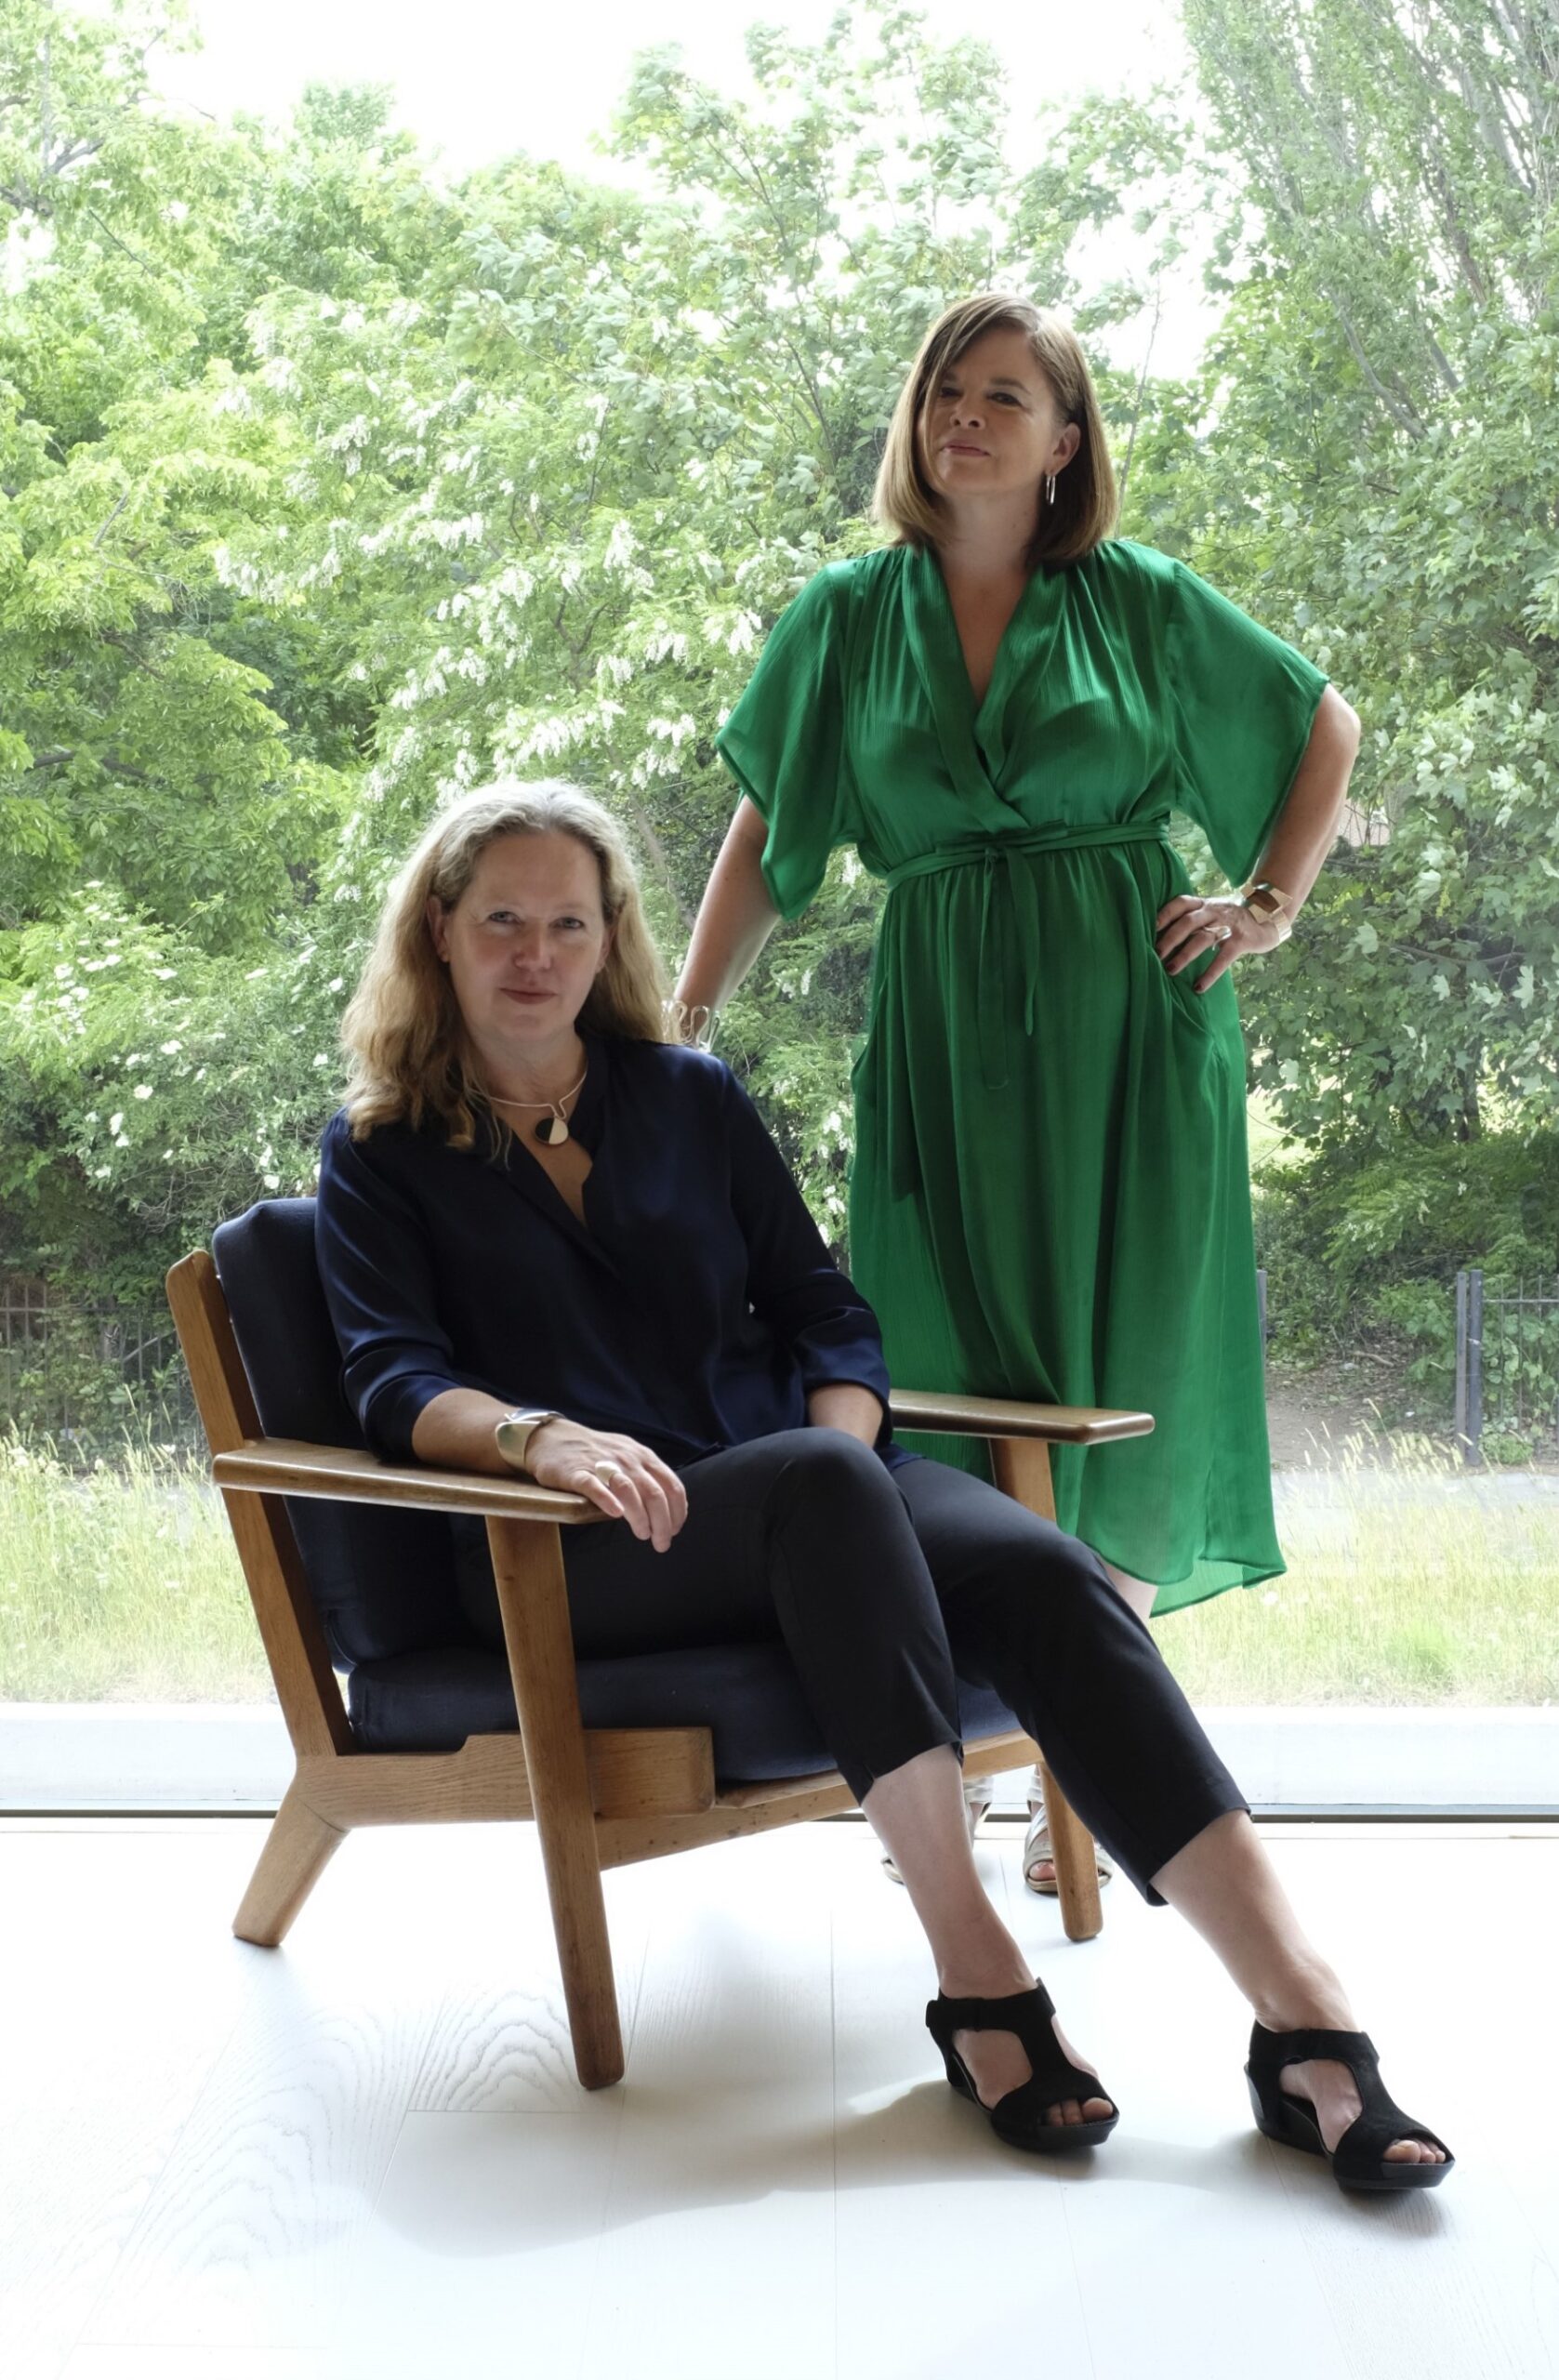 Petra Curtis and Lucy Ryder Richardson, founders of ©modernshows.com